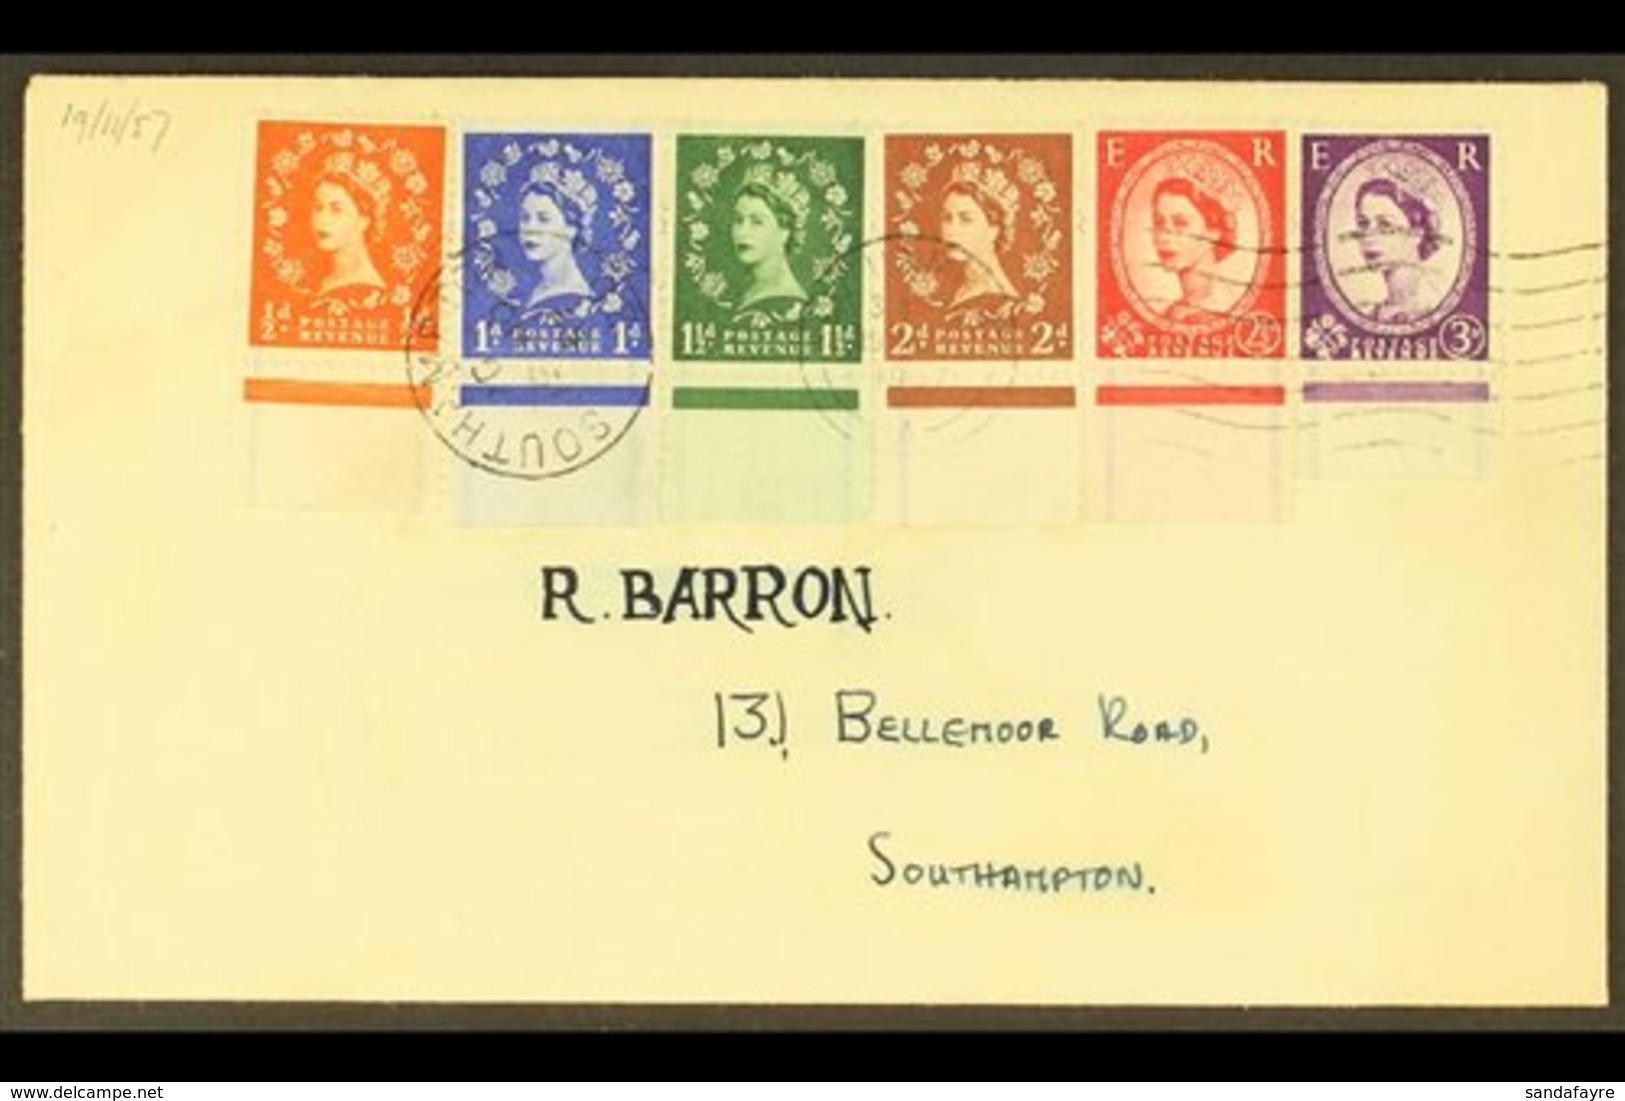 1957 (19th November) Plain Cover Bearing Graphite Lines Wilding Definitives Complete Set Of Six, Each Lower Marginal Exa - FDC